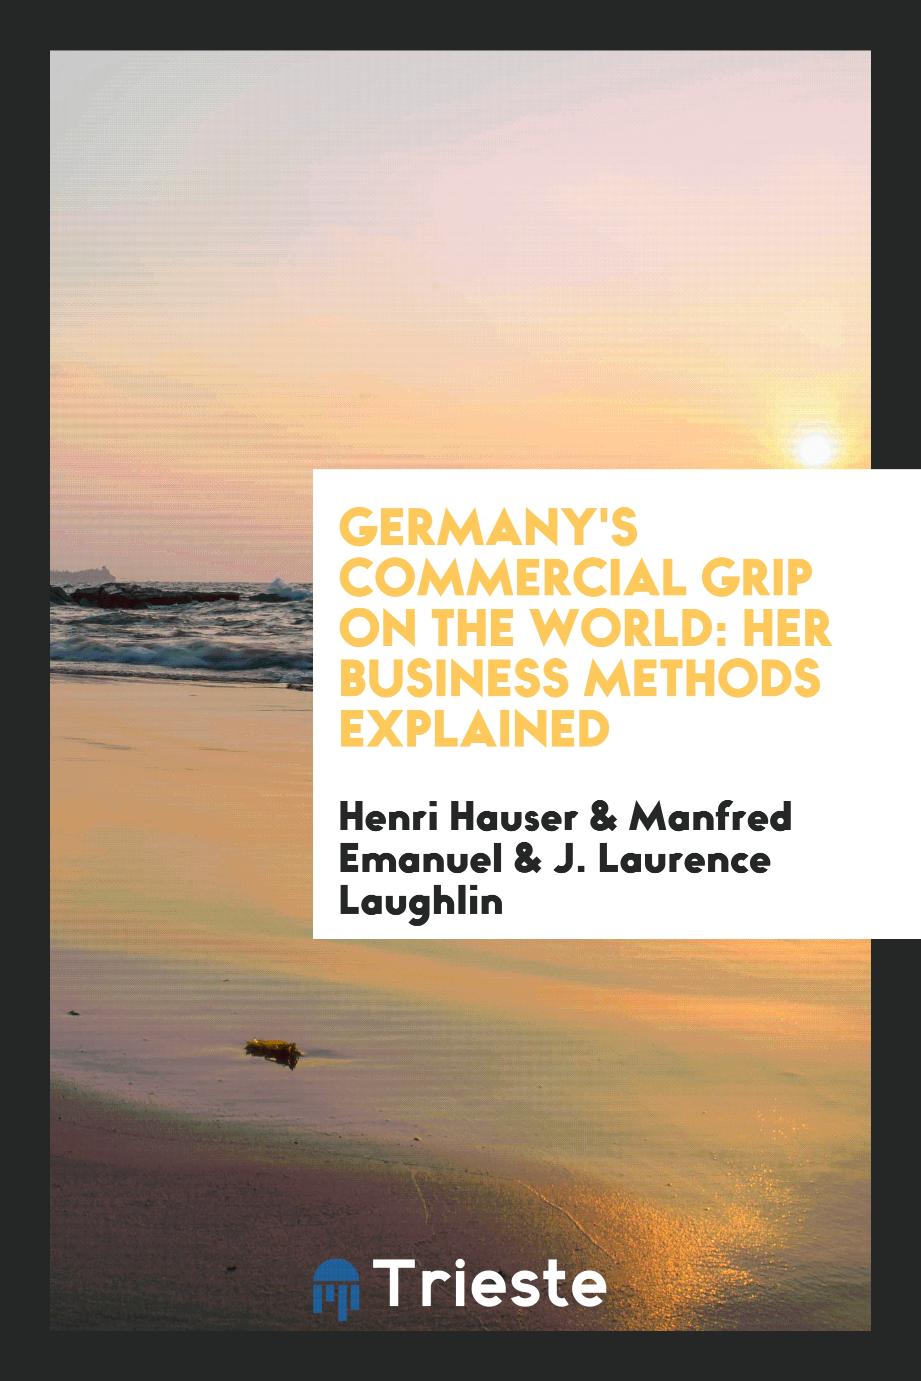 Germany's Commercial Grip on the World: Her Business Methods Explained